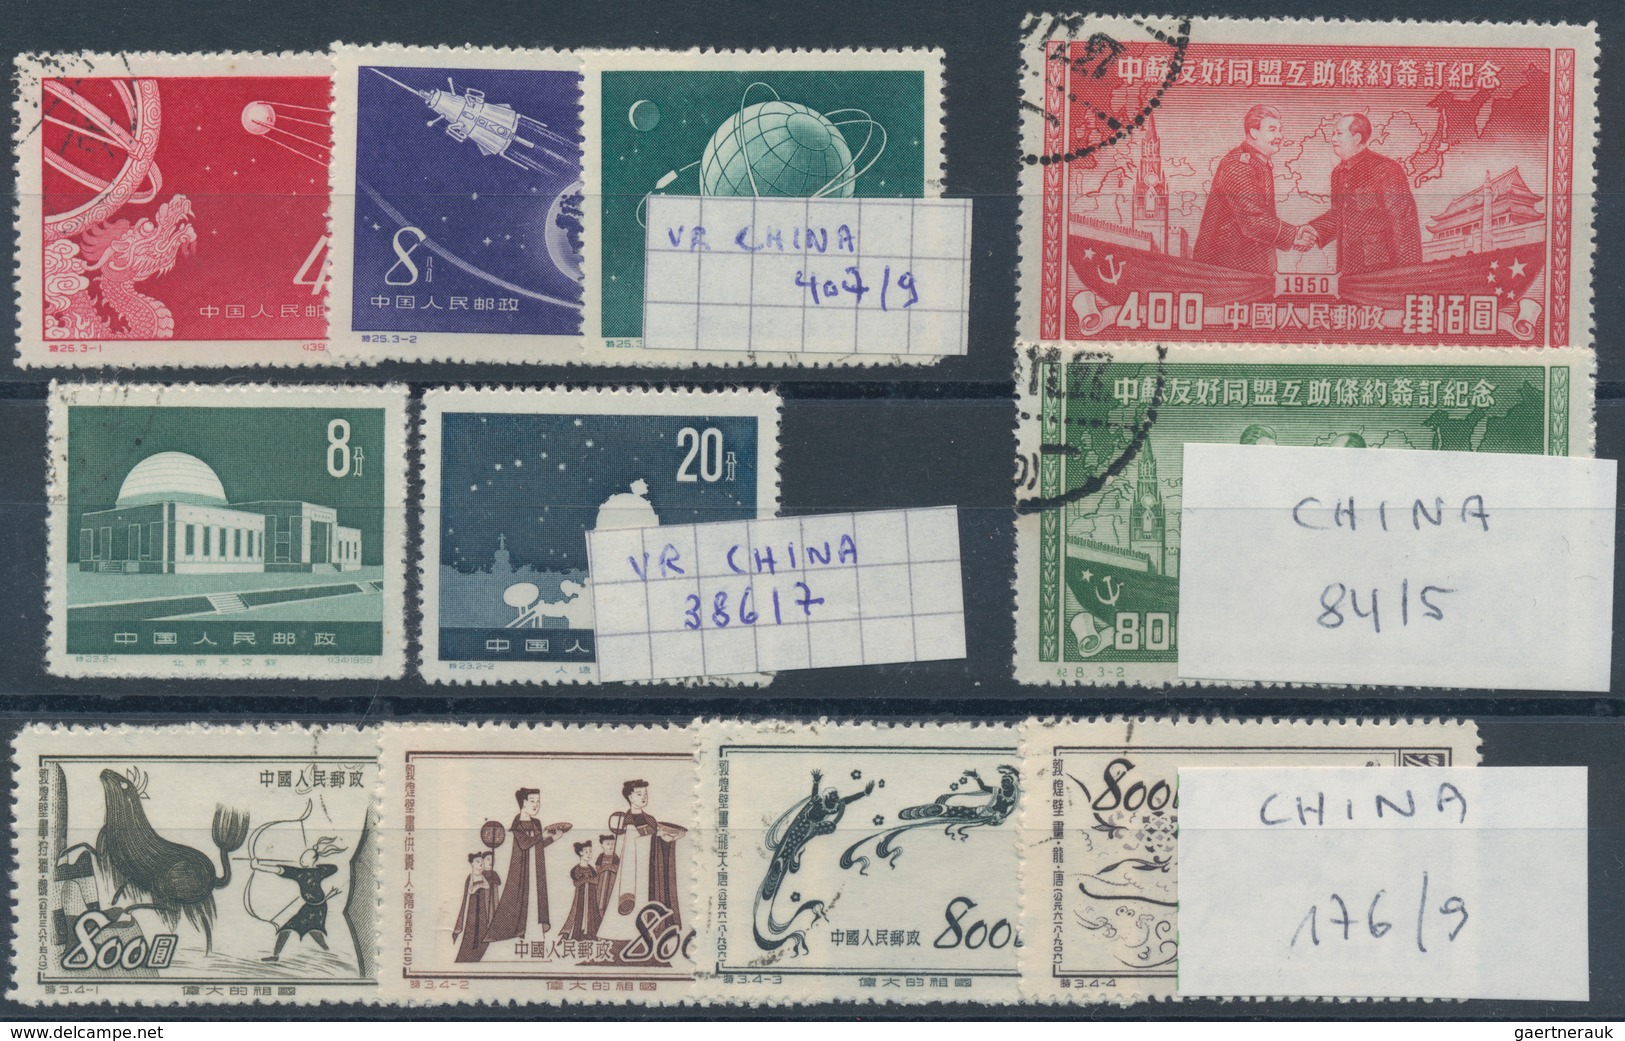 China - Volksrepublik: 1950s/1970s, PRC and some Taiwan, mainly unused lot on stockcards.